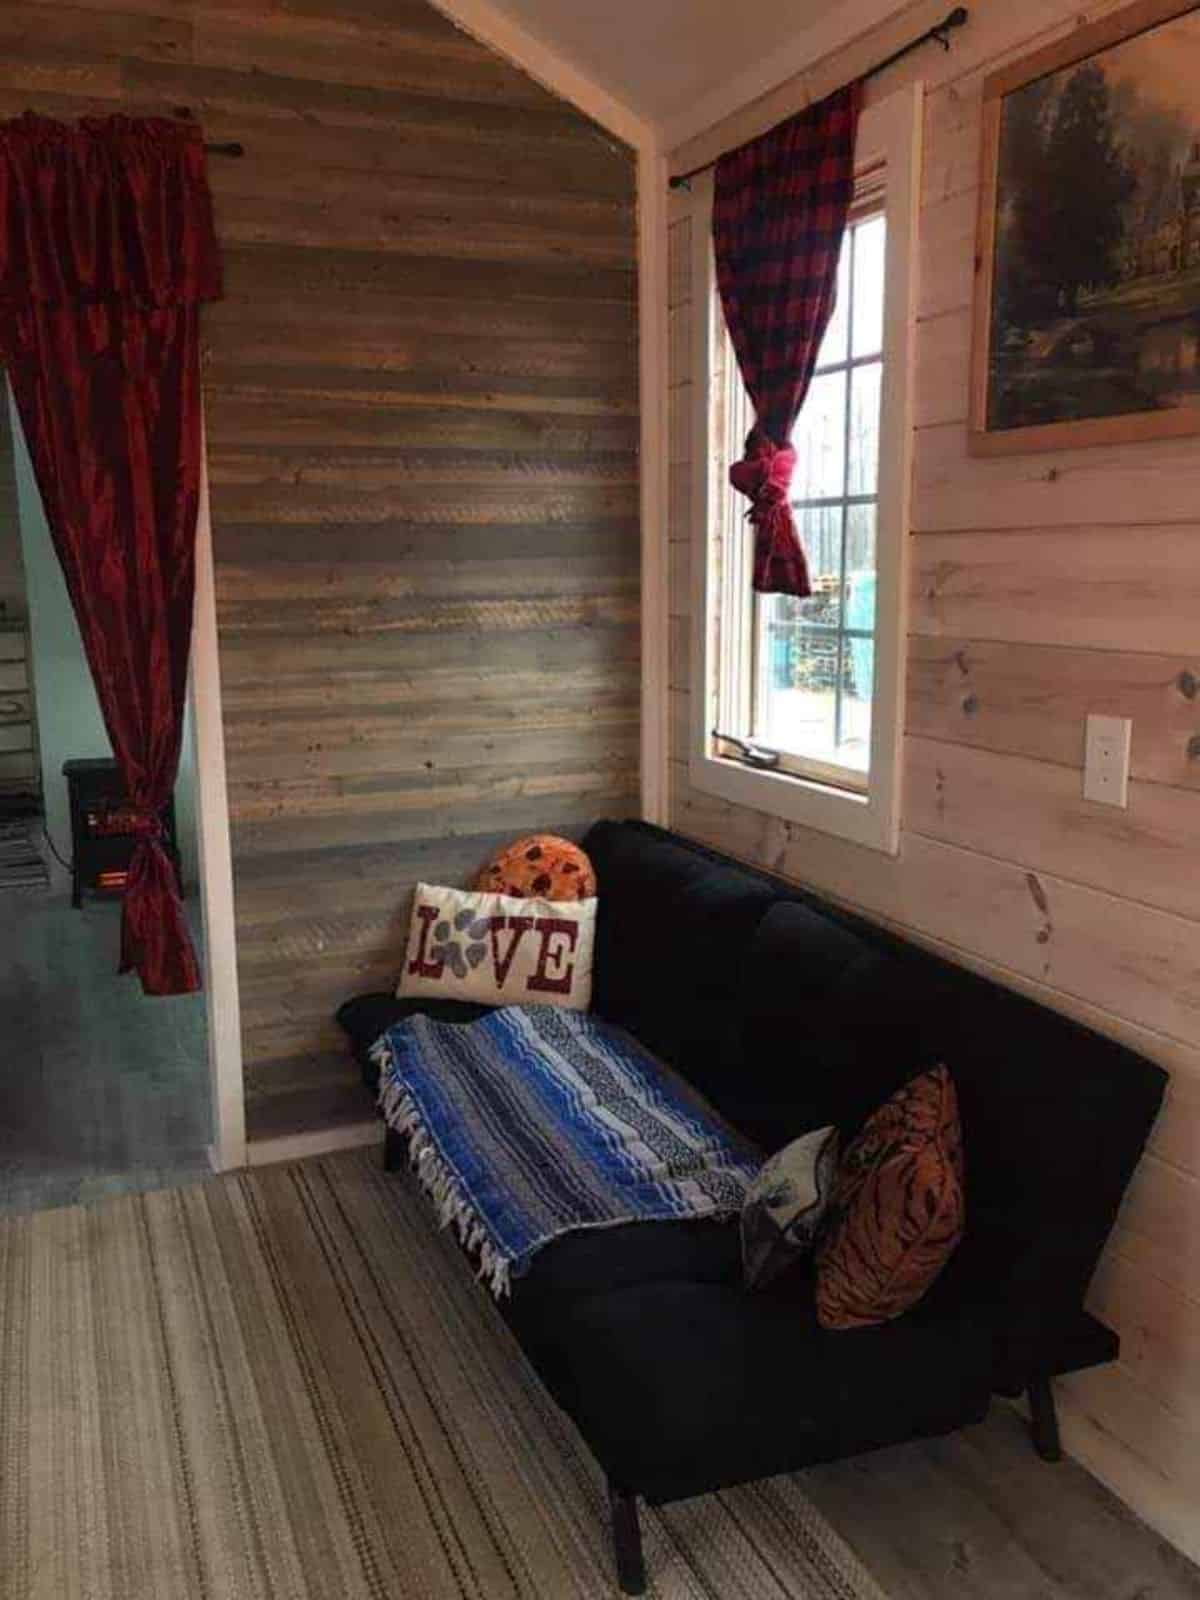 Living area of Rustic tiny home  has a couch and huge window